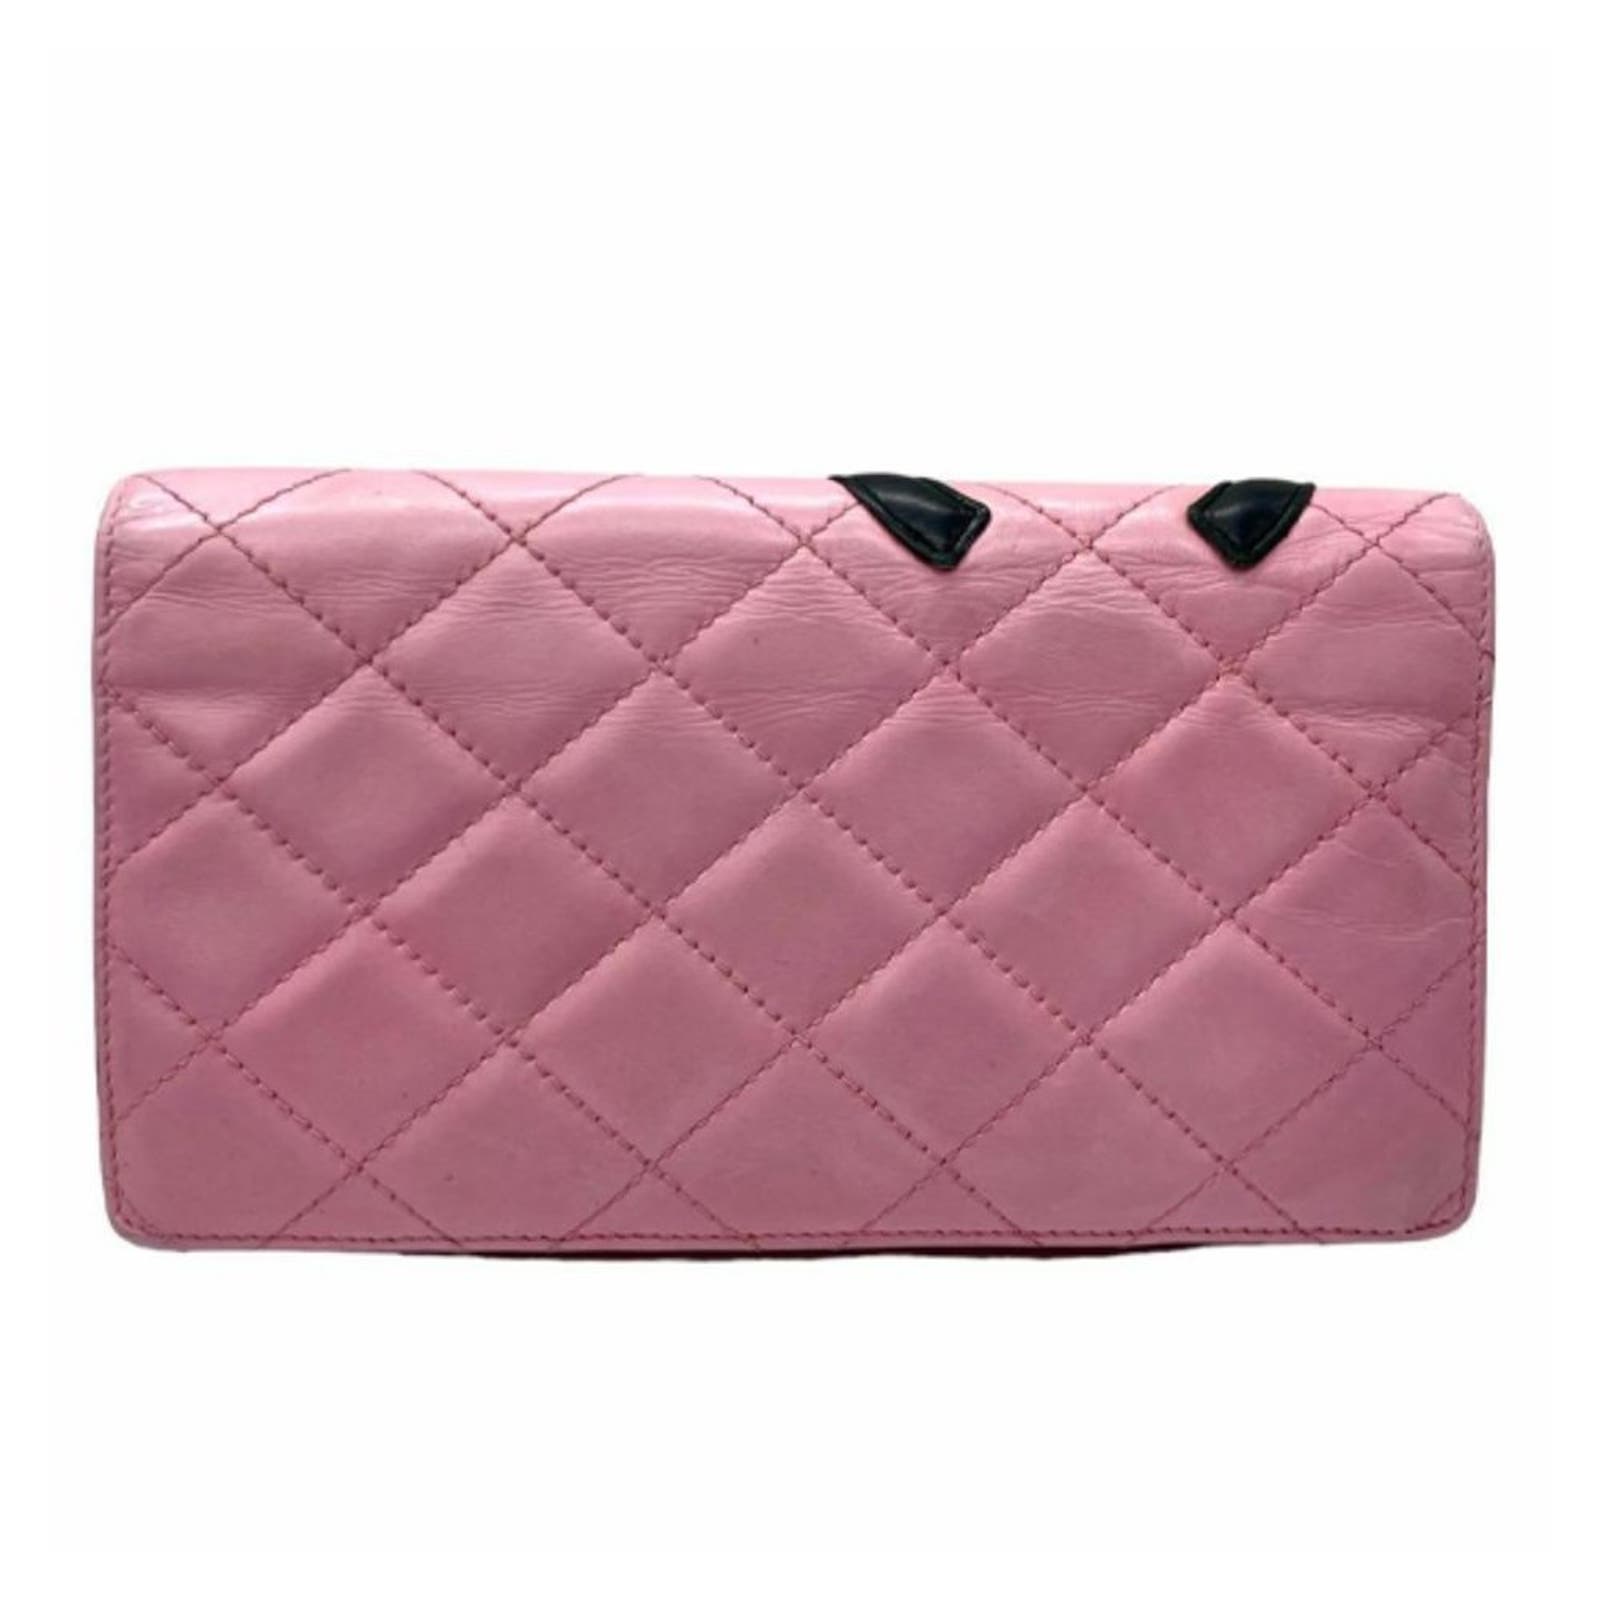 Authentic CHANEL Cambon Line Long Wallet Purse Pink Quilted Leather